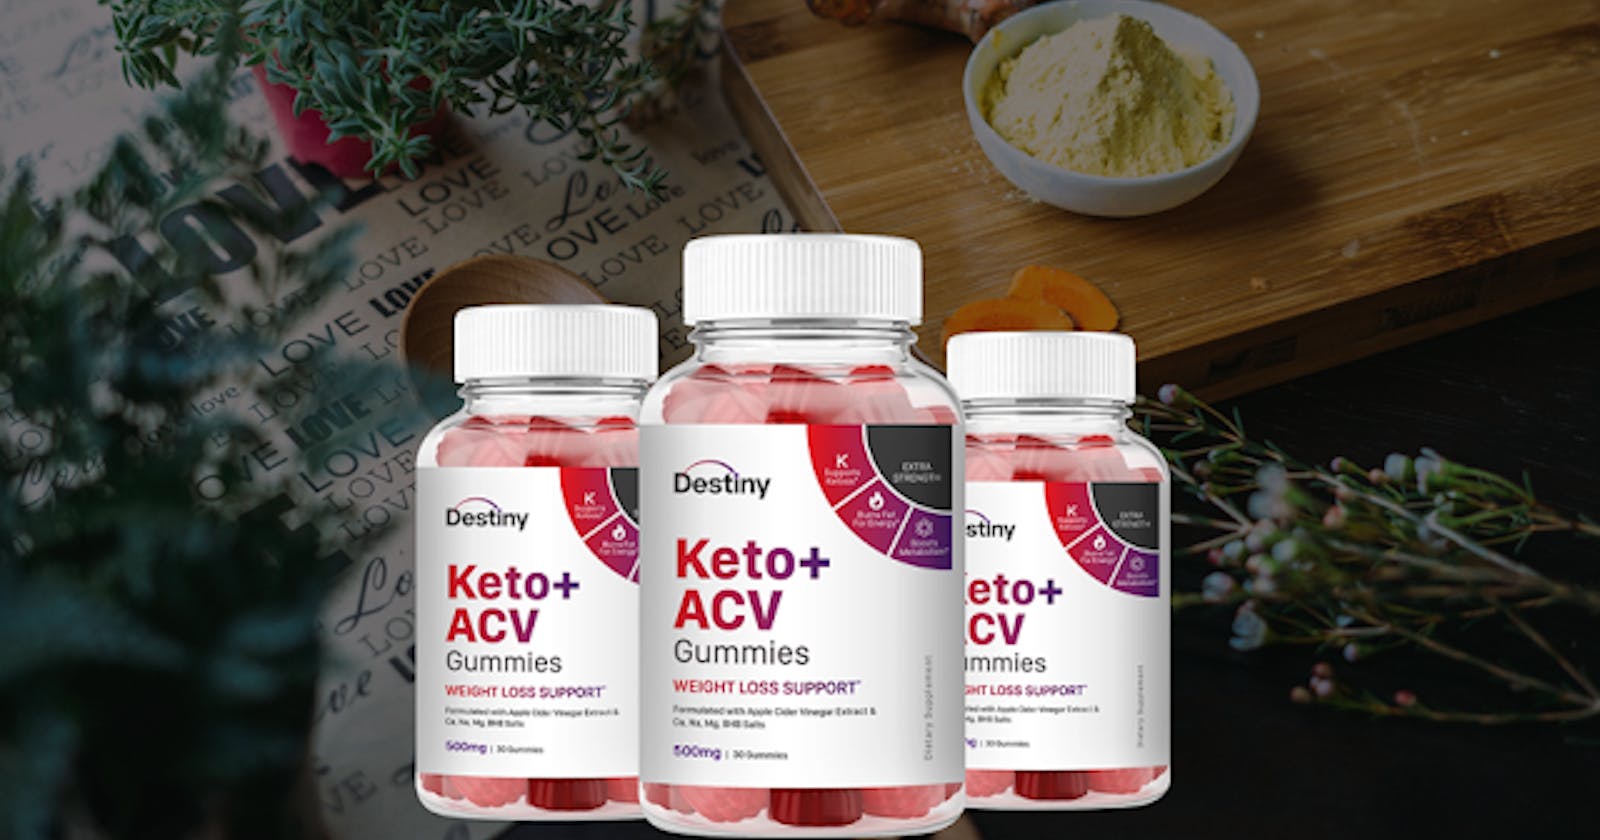 Destiny Keto ACV Gummies Reviews-Does It Really Work? Must Check My Result!